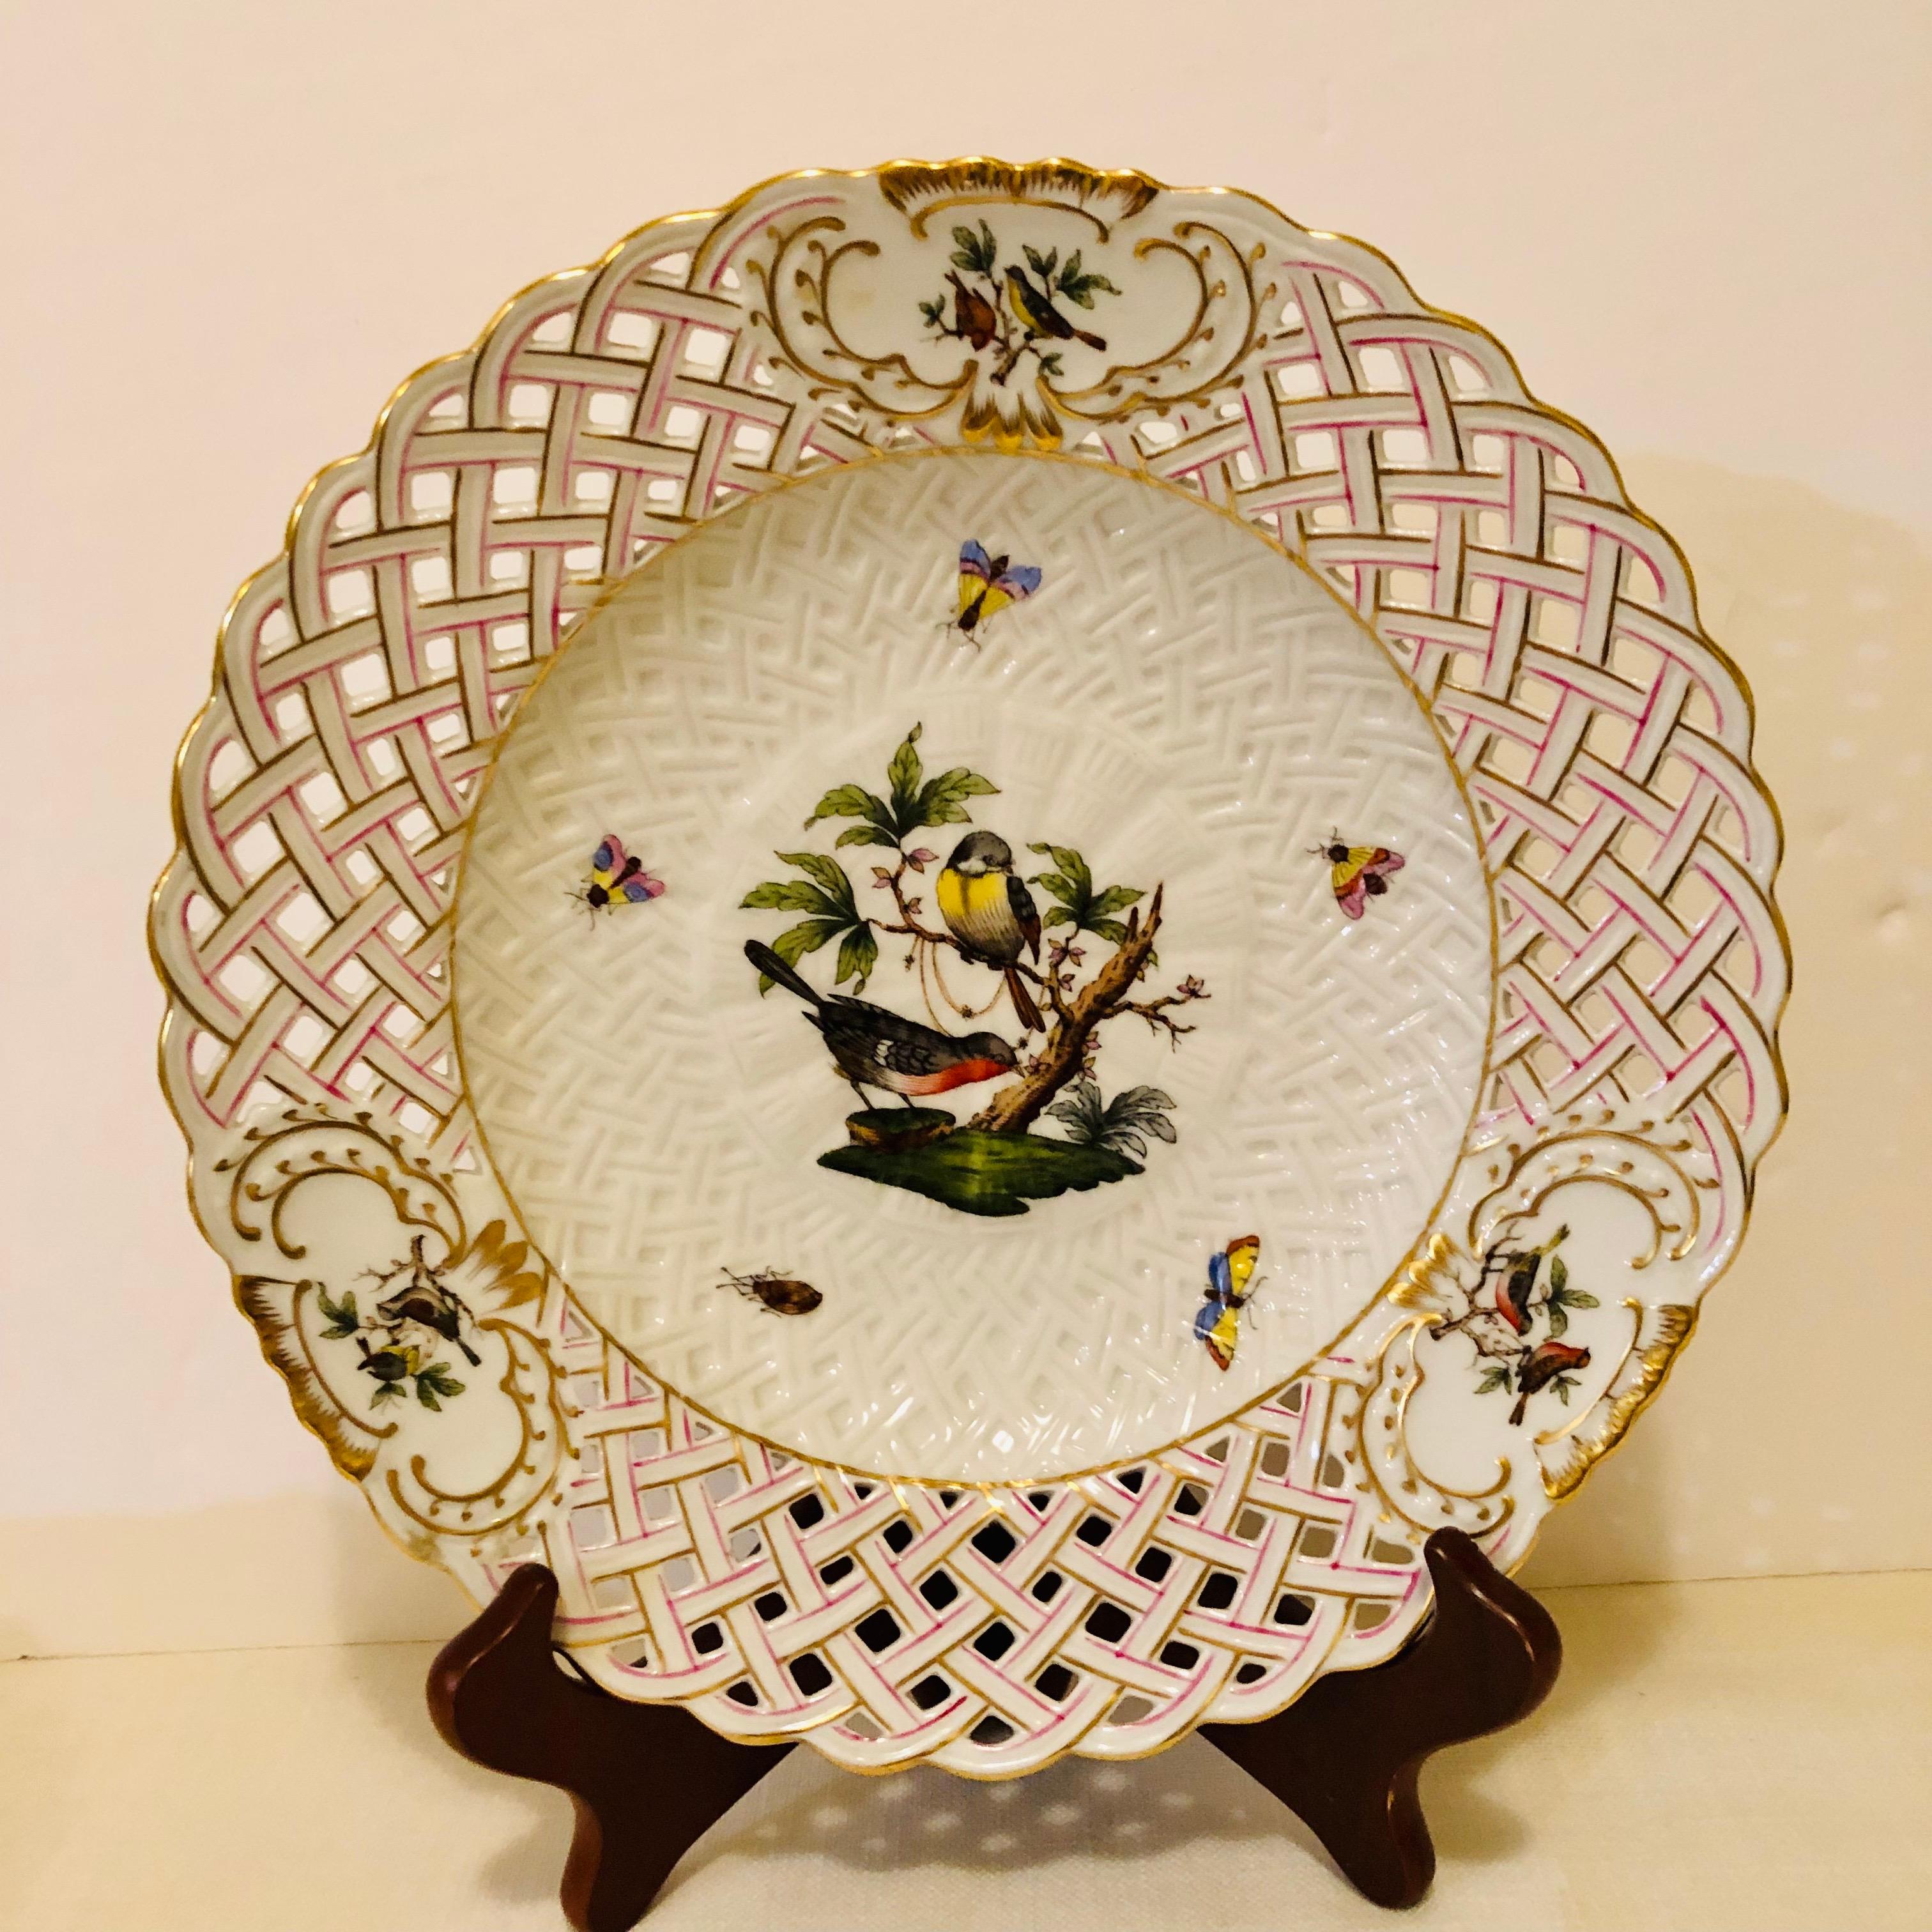 This is a stunning Herend Rothschild bird reticulated plate that has a central painting of two birds surrounded by a pink and gold reticulated border and three cartouches with different paintings of birds. The paintings of birds have painted accents